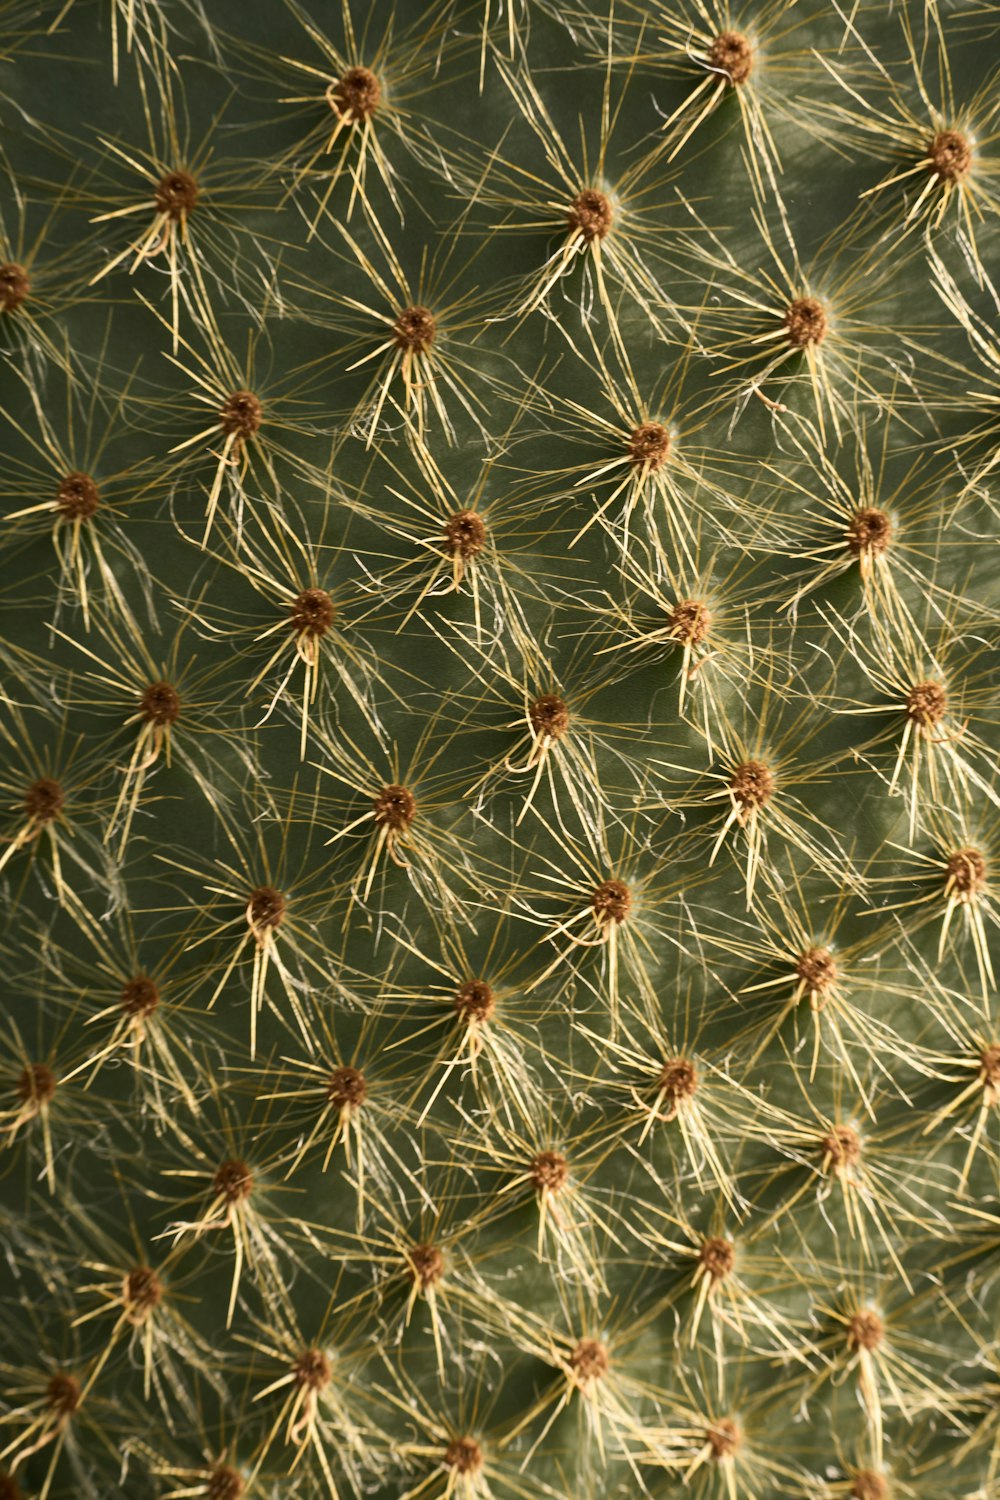 a close up of a cactus with many small needles